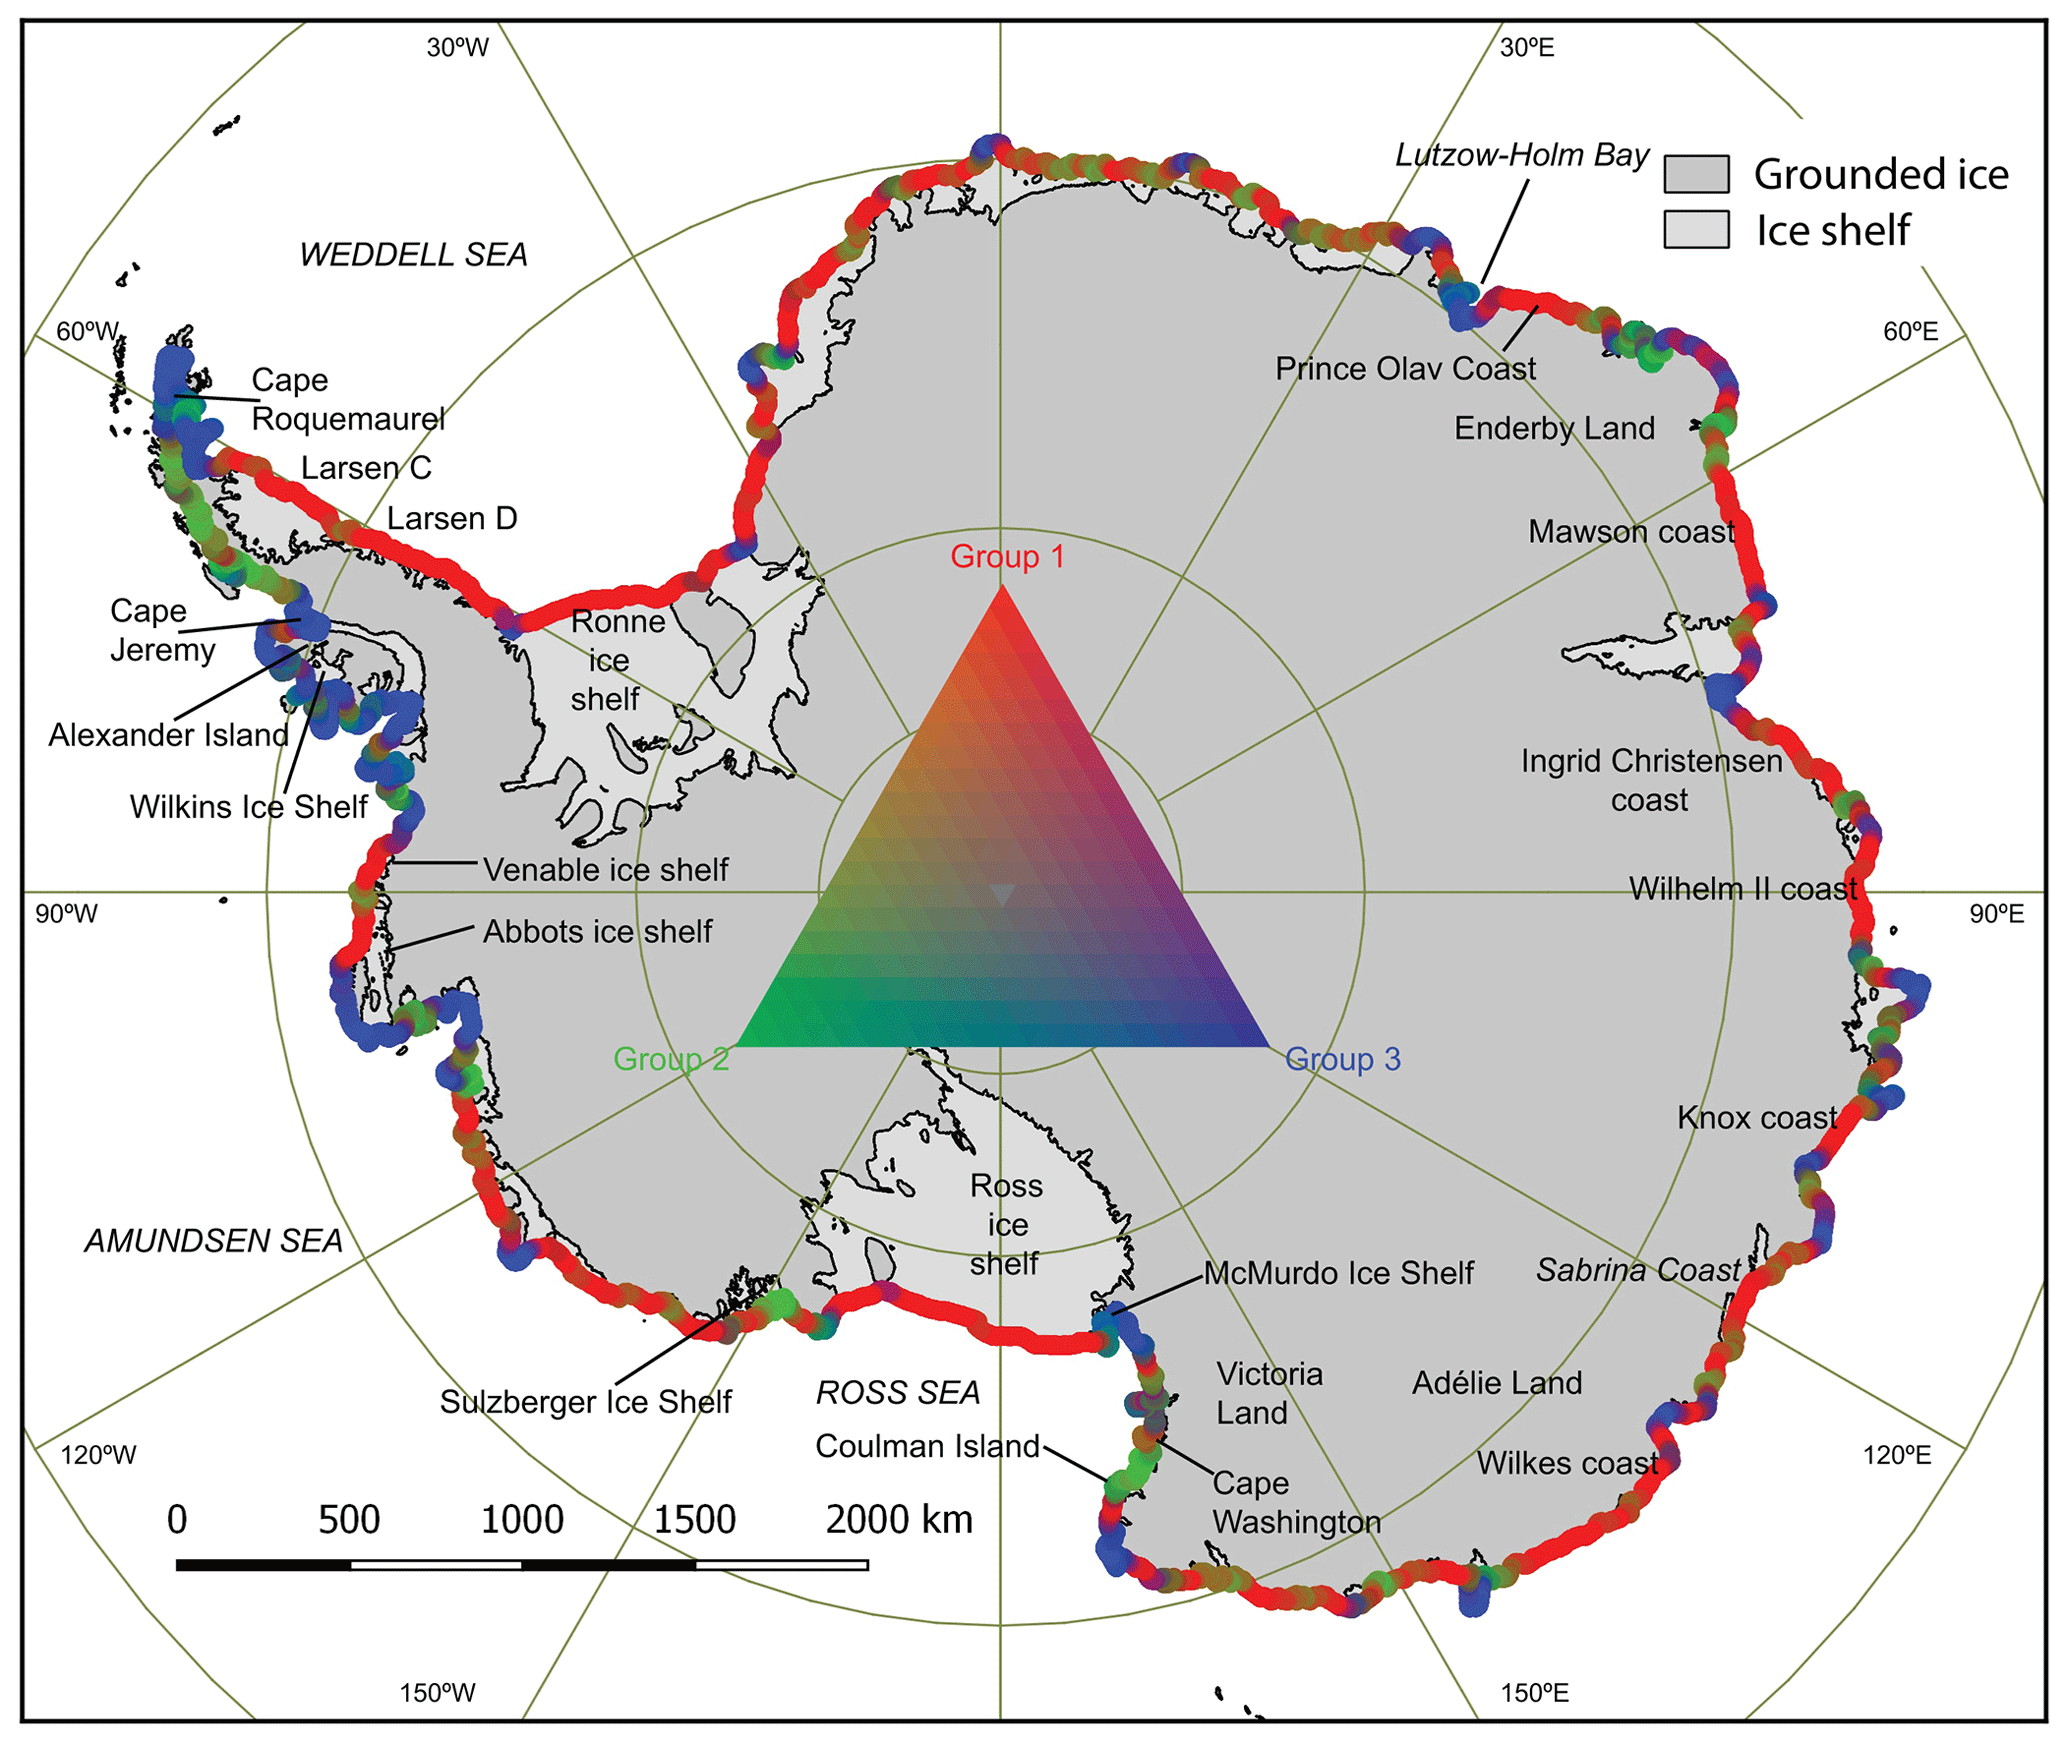 A continent-wide detailed geological map dataset of Antarctica